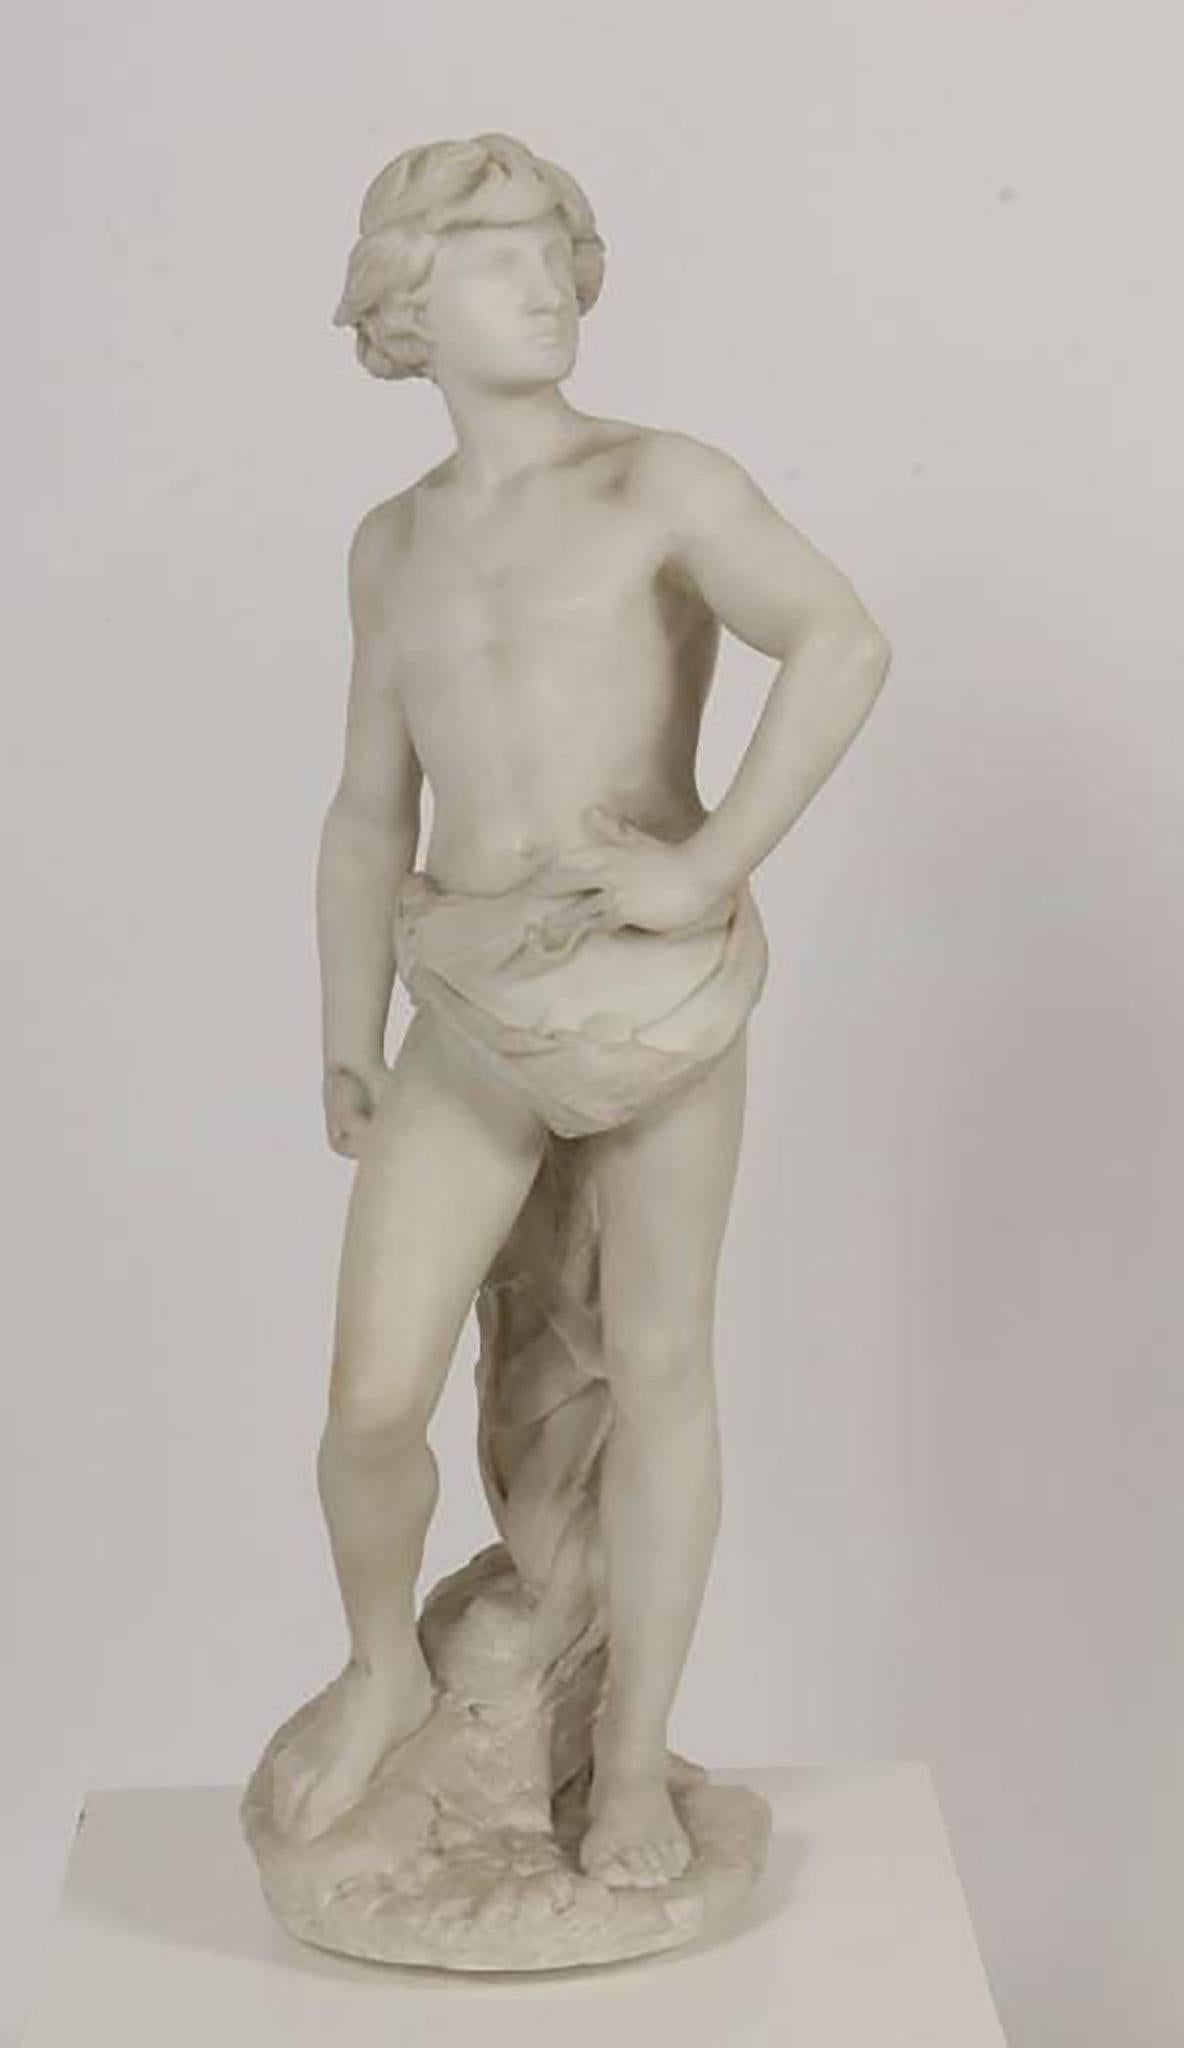 Unknown Still-Life Sculpture - Large Marble Sculpture of Young David Collecting Stones